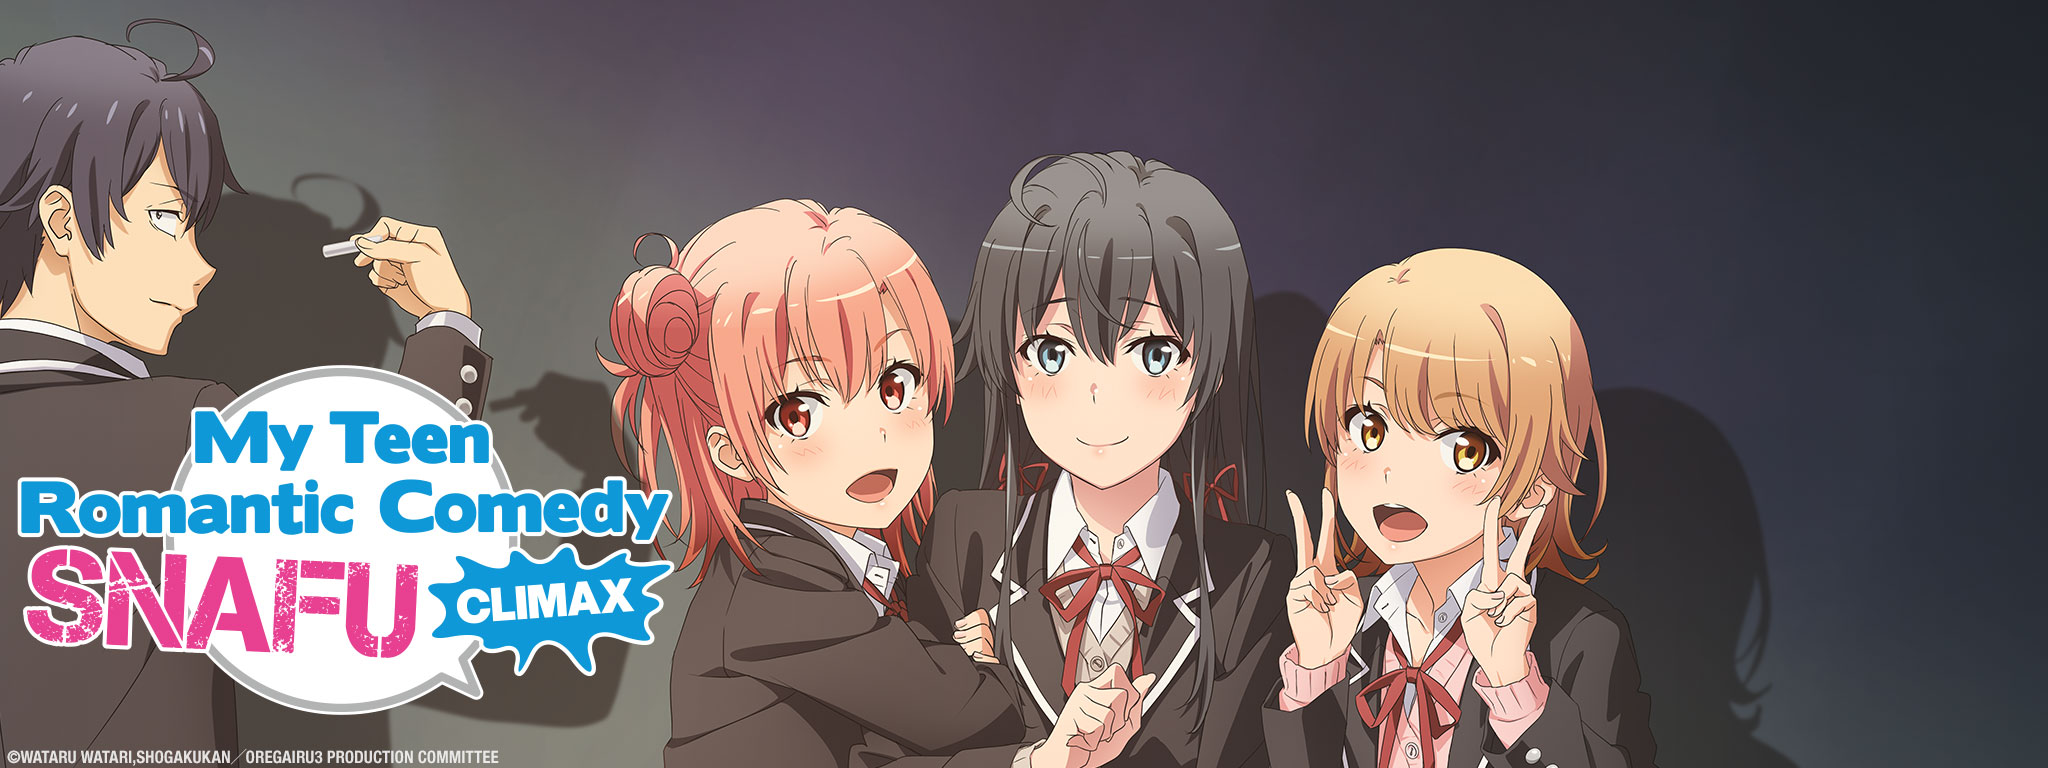 Title Art for My Teen Romantic Comedy SNAFU Climax